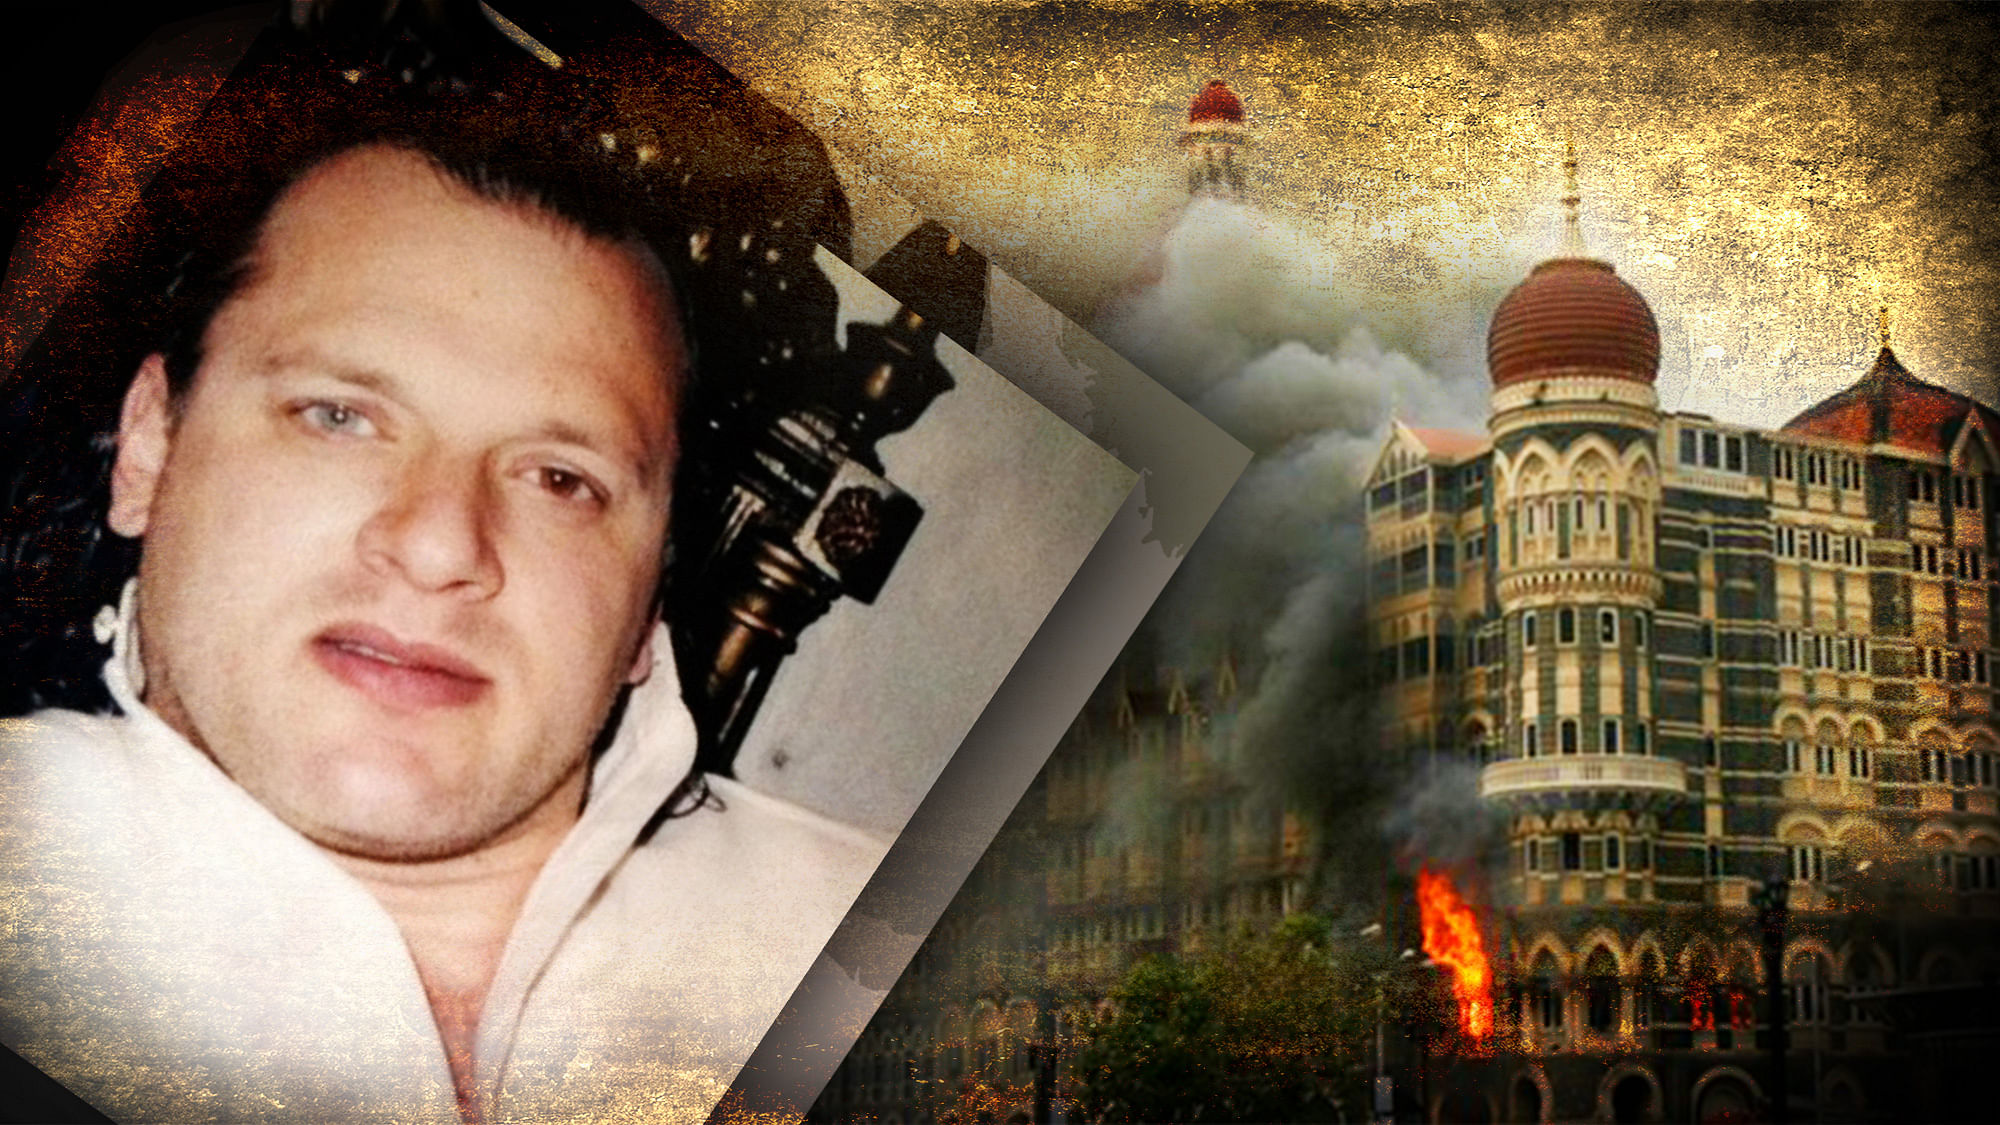 David Headley has psychopathic traits and cannot be trusted, says Adrian Levy. (Photo: <b>The Quint</b>)